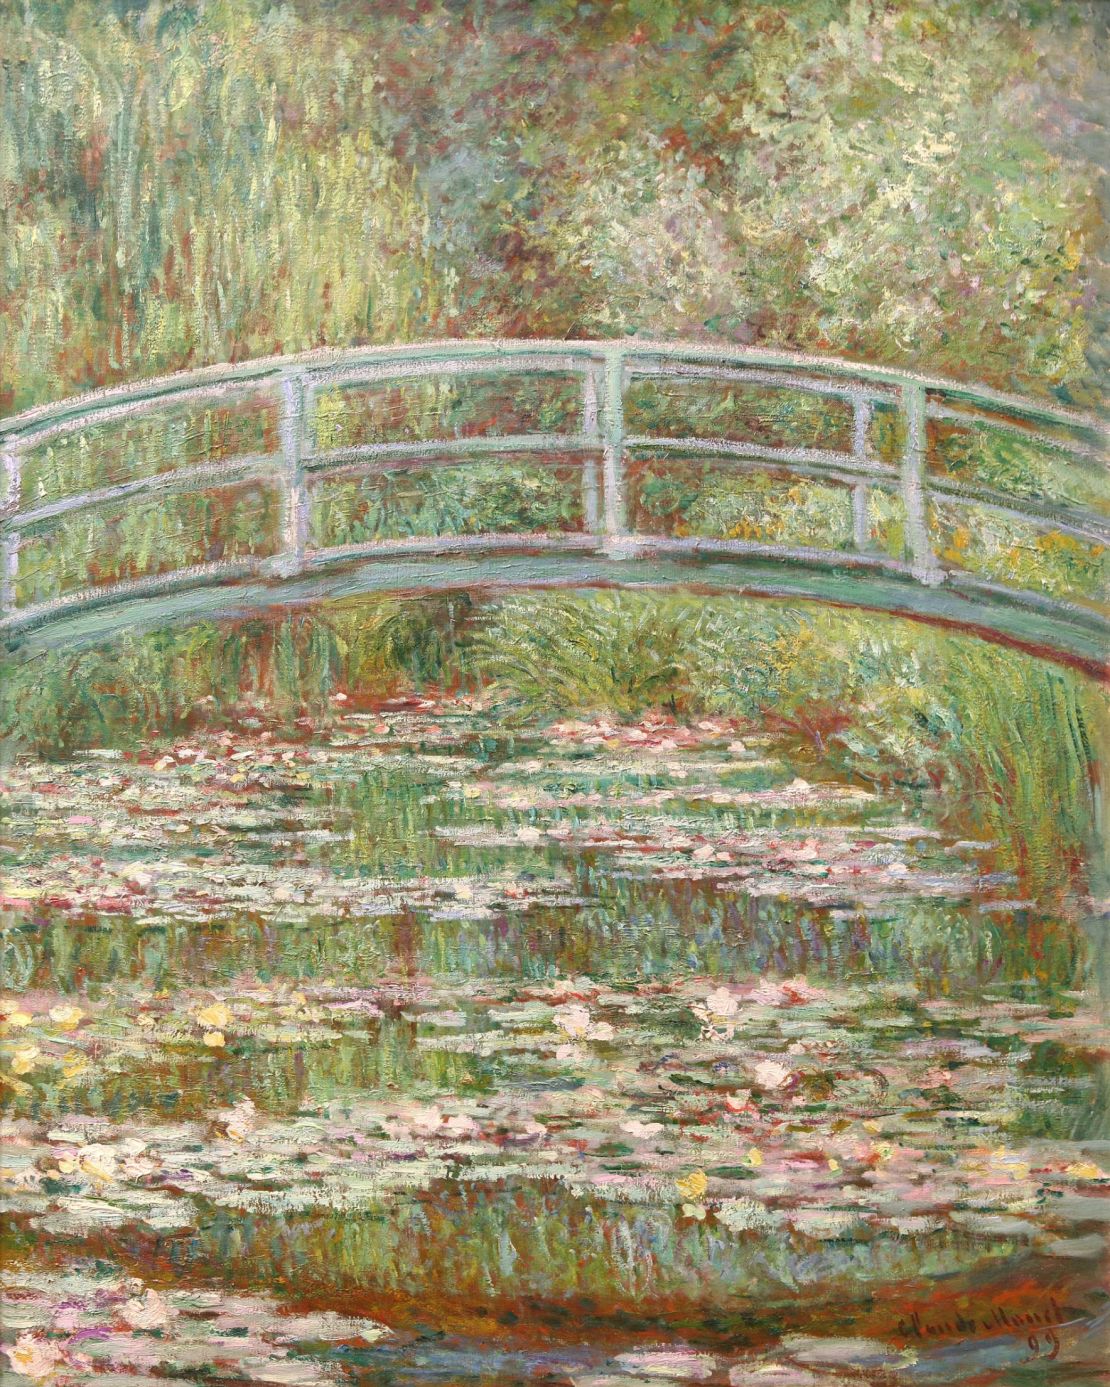 "Bridge over a Pond of Water Lilies" by Claude Monet, located in the Metropolitan Museum of Art, New York.